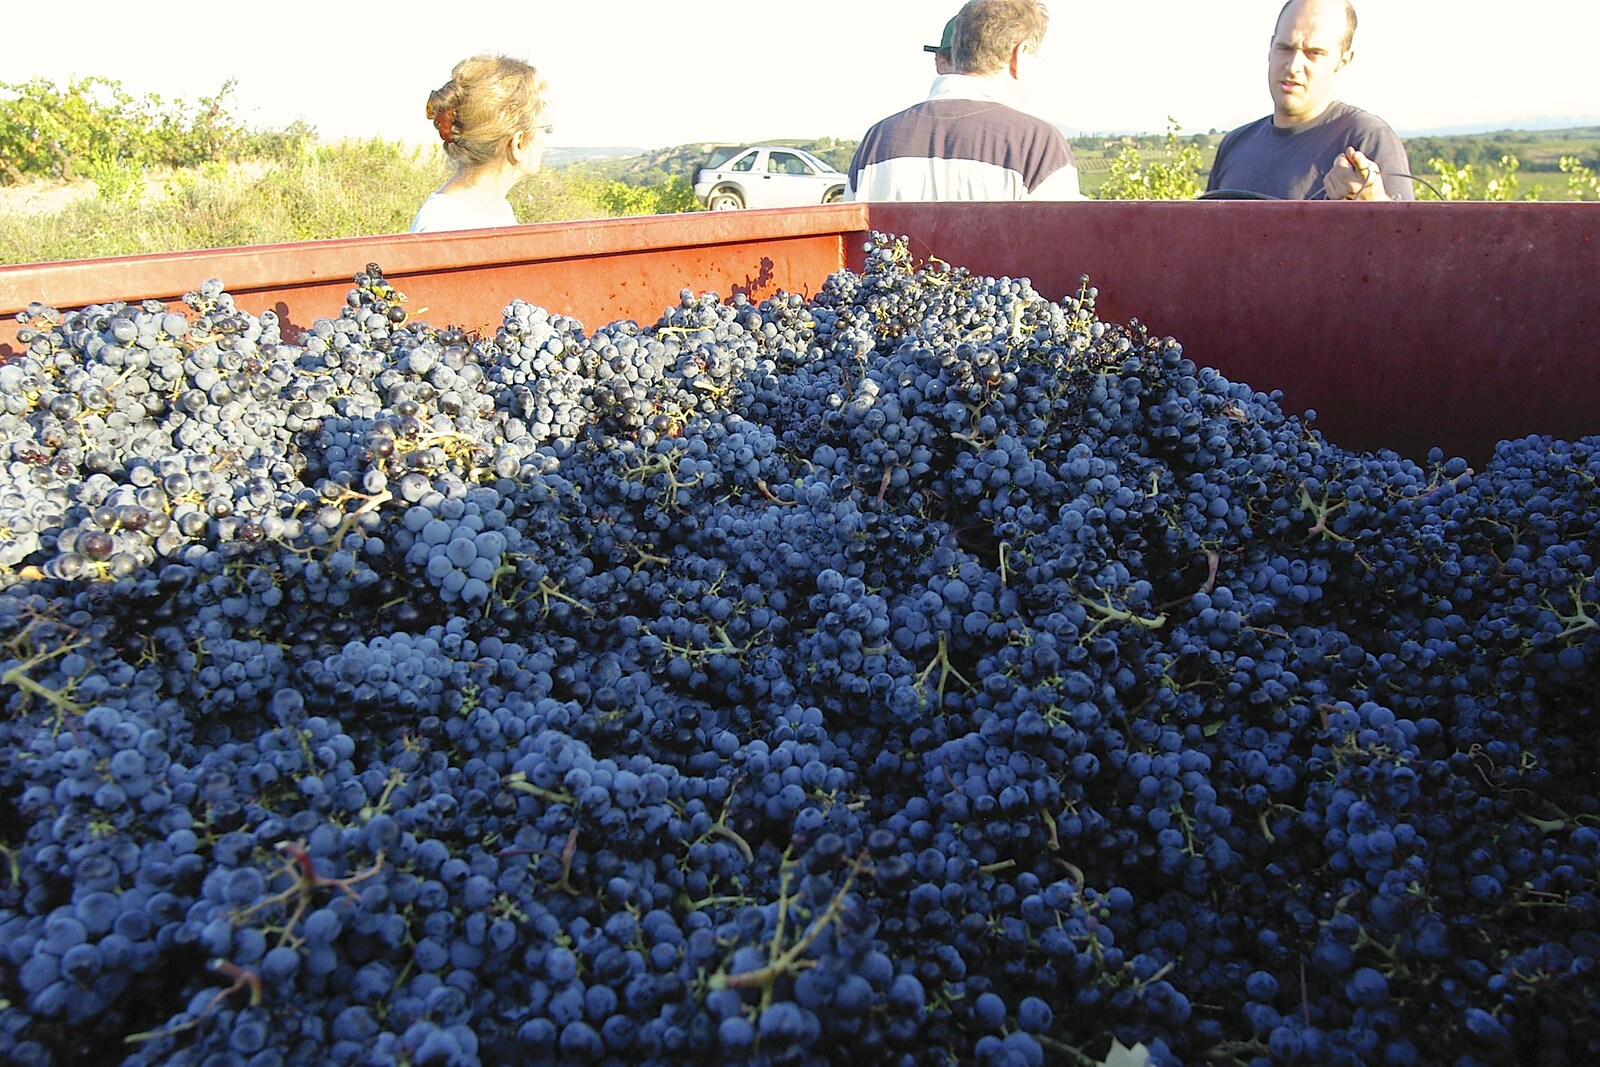 The harvest in the trailer from Grape Picking and Pressing, Roussillon, France - 19th September 2006